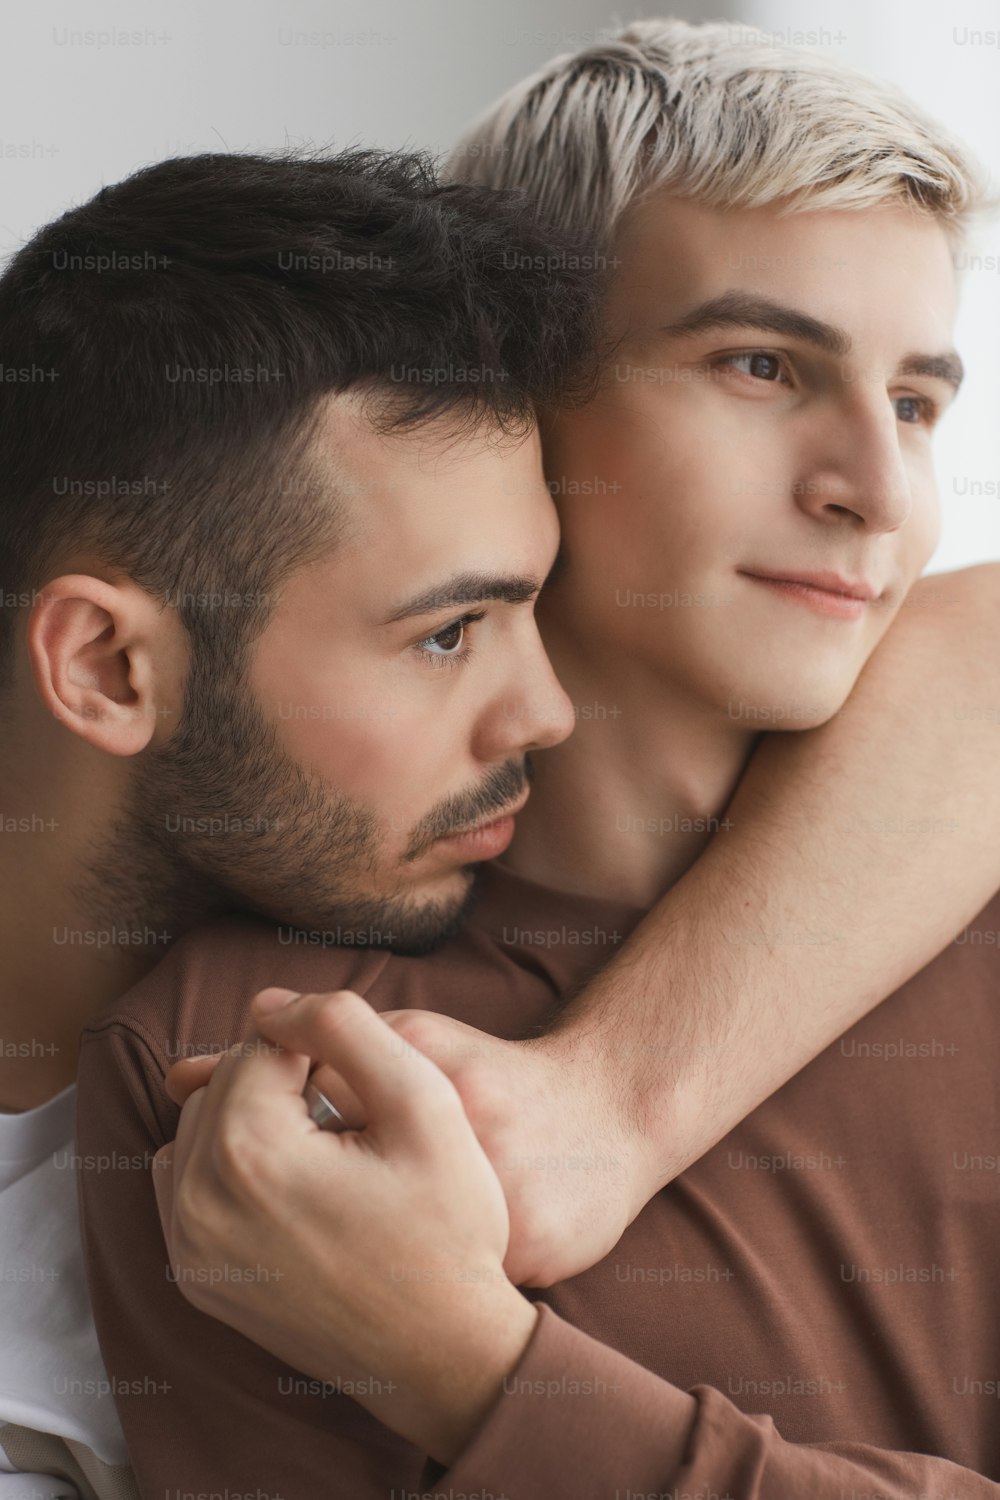 Vertical close up portrait of contemporary gay couple embracing tenderly and holding hands while looking away